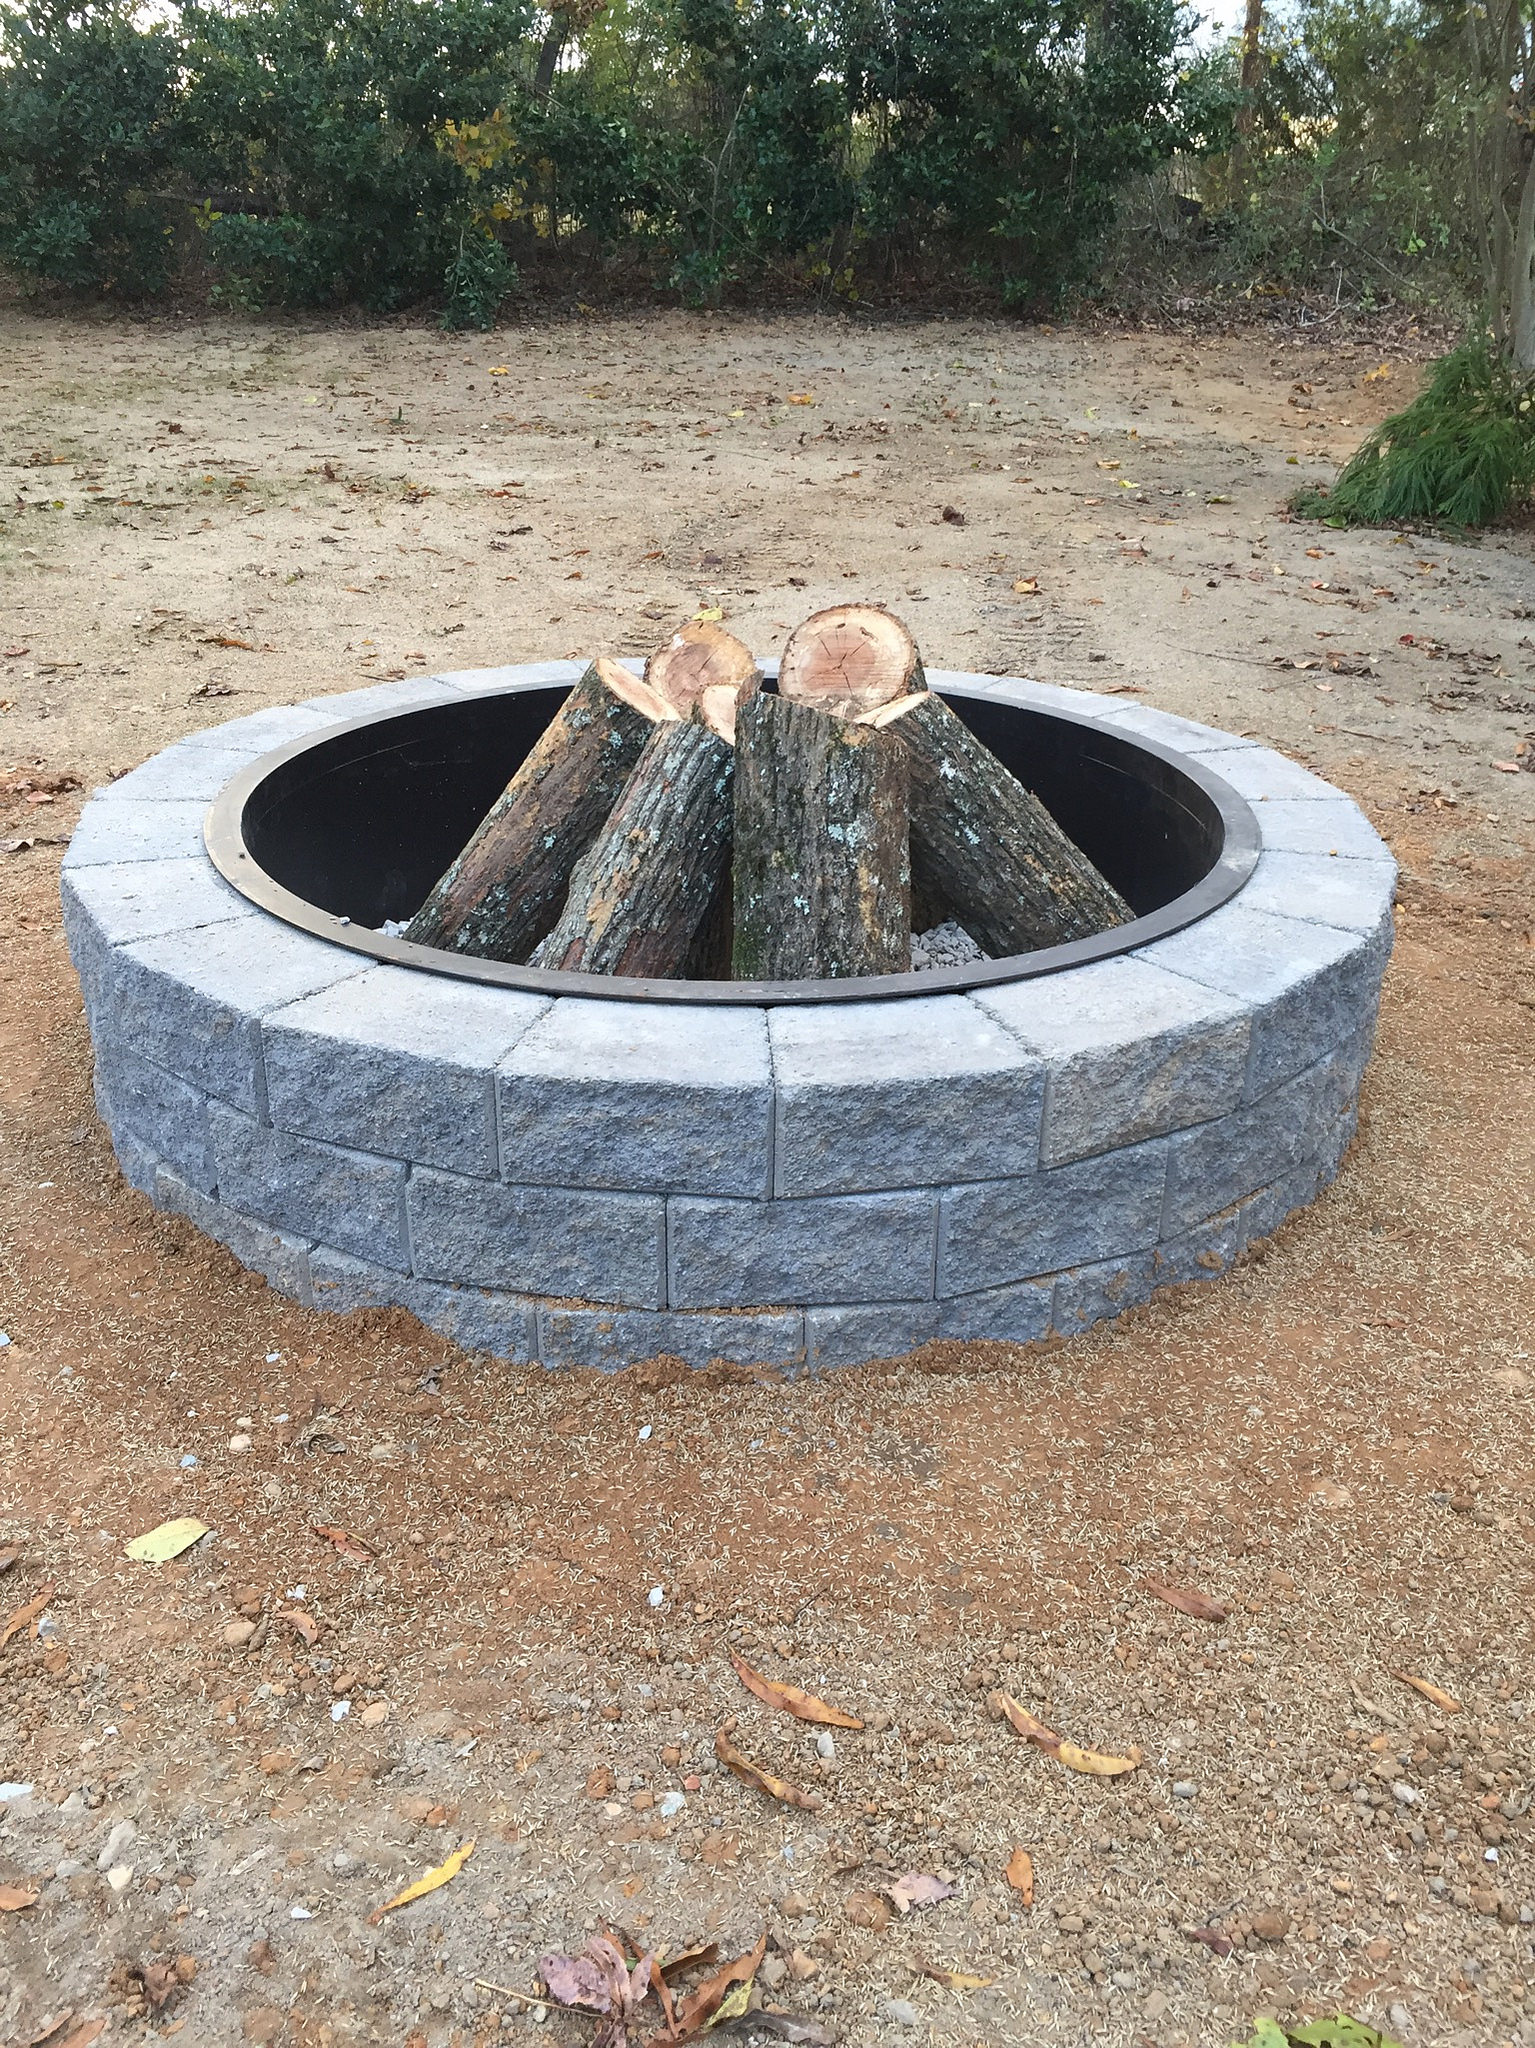 New fire pit.